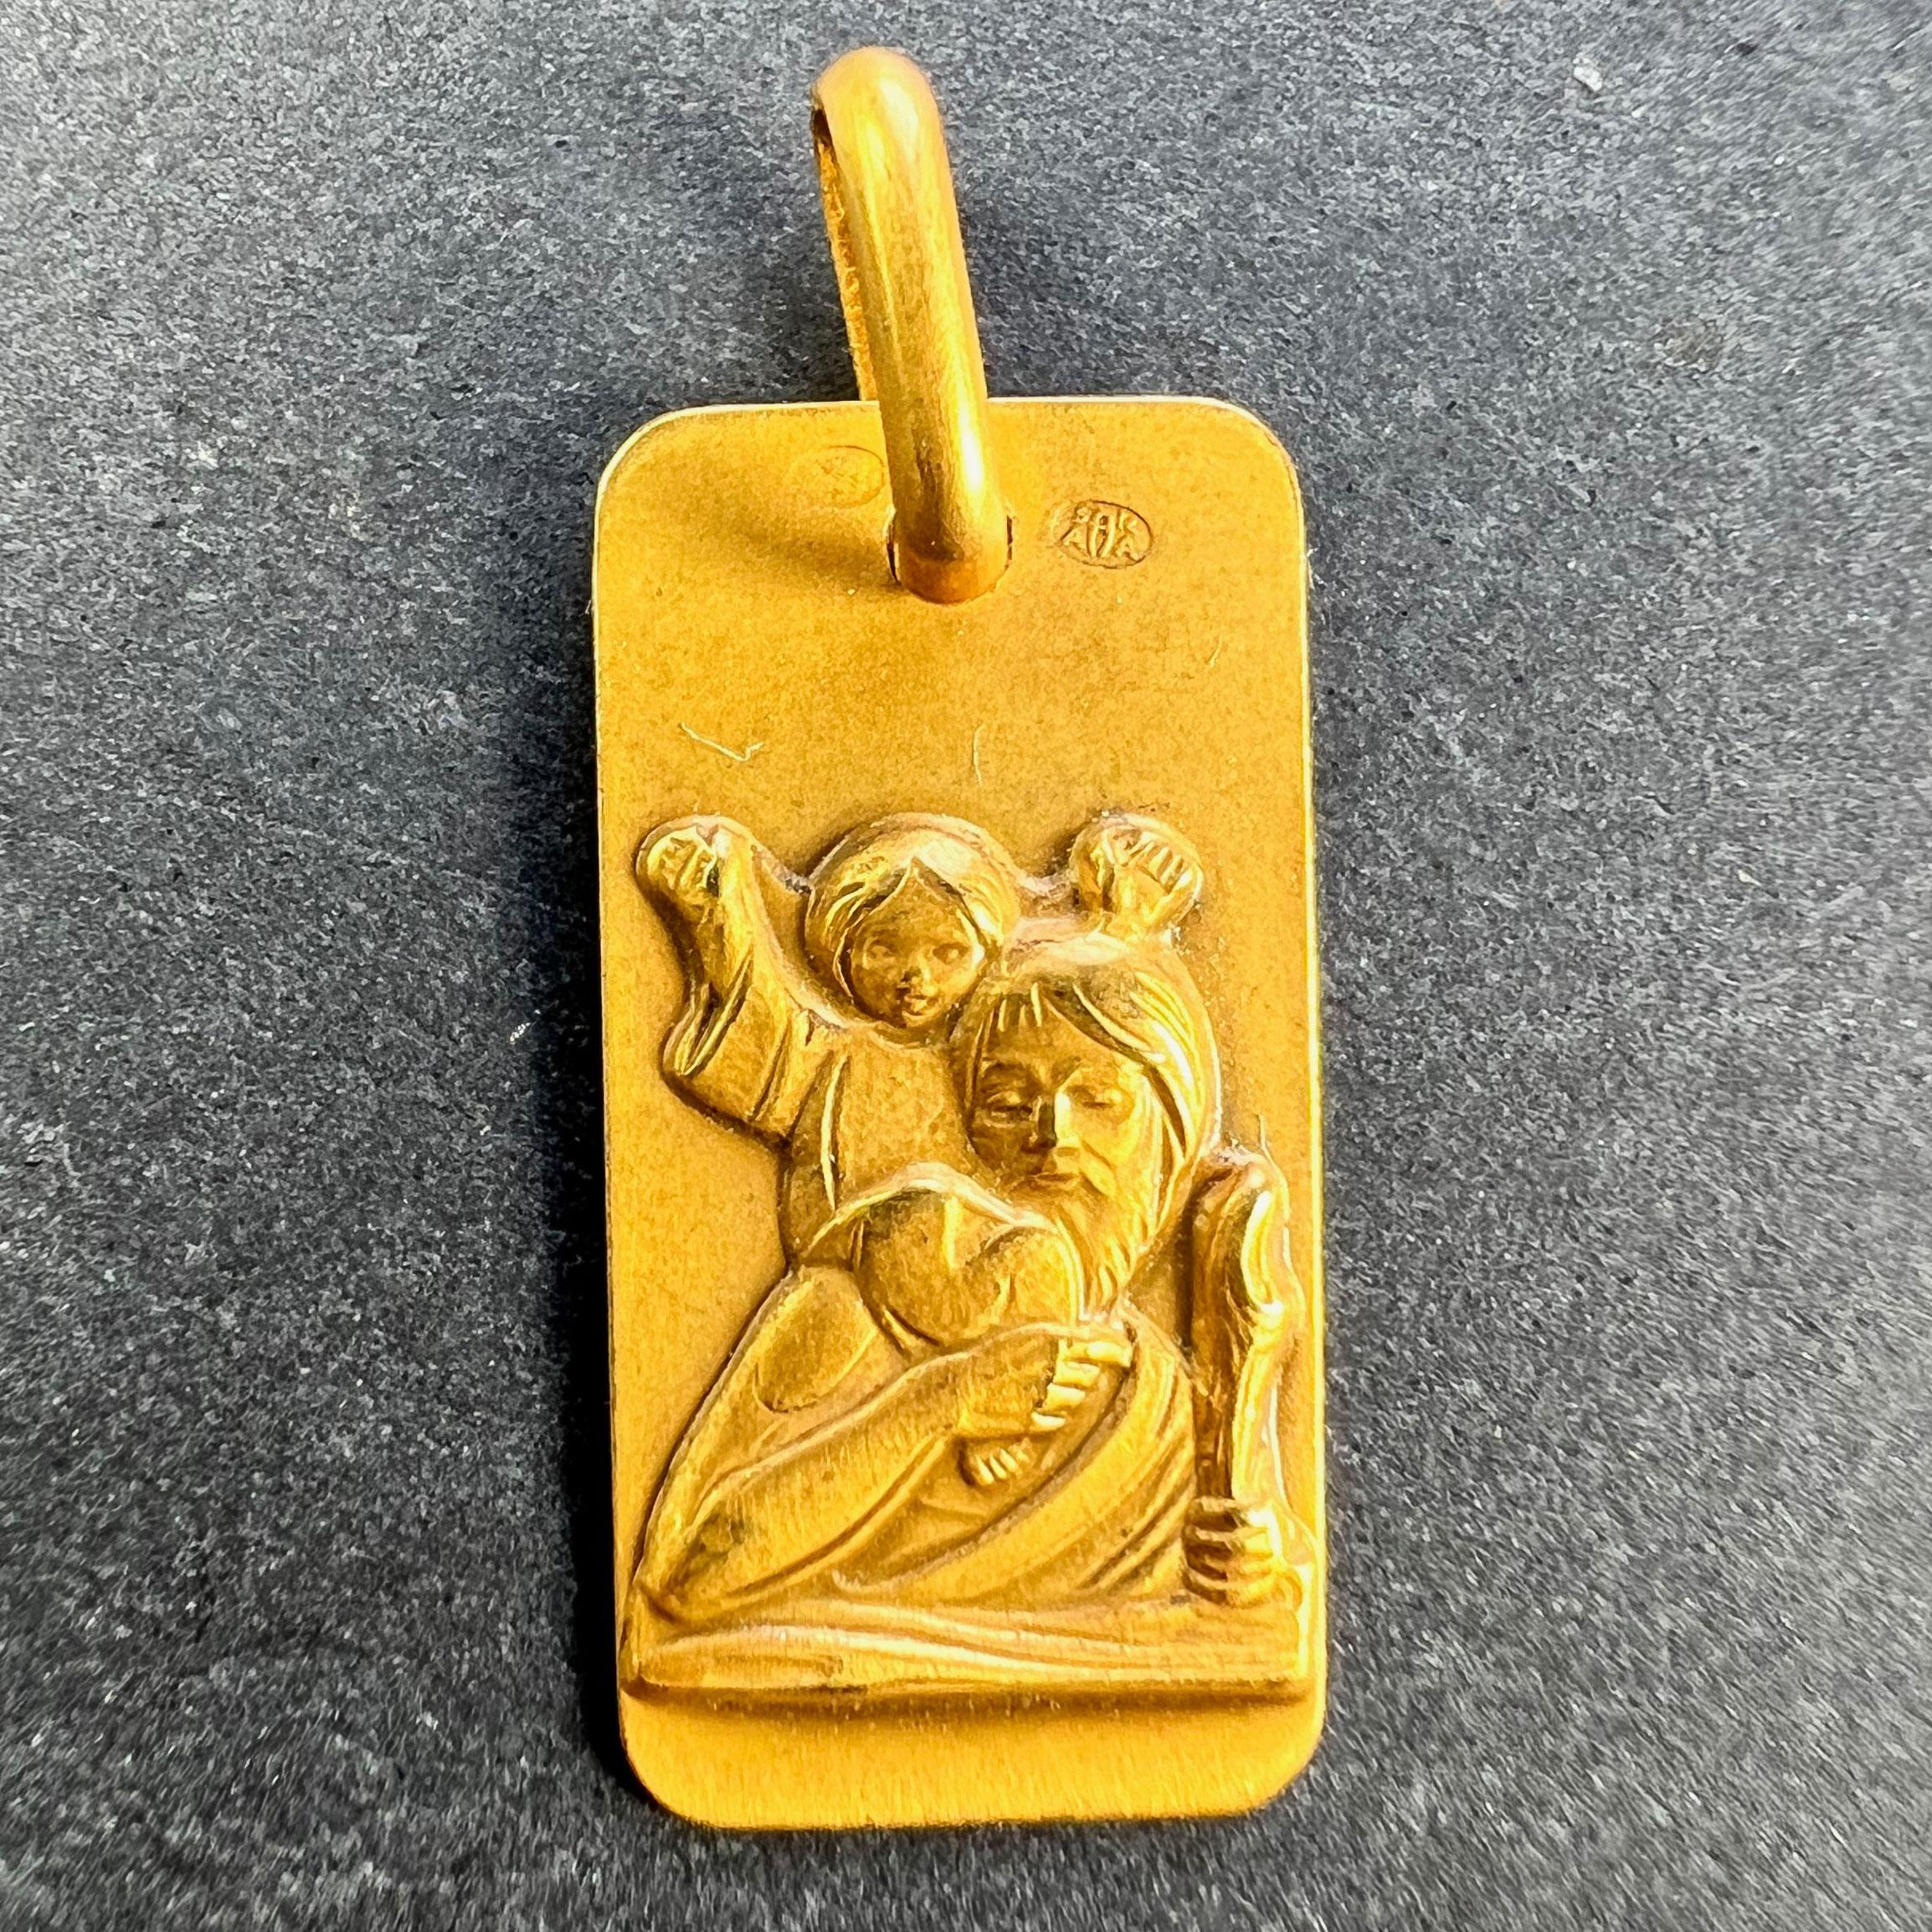 A vintage French 18 karat (18K) yellow gold rectangular charm pendant or medal depicting St Christopher carrying the infant Christ across the river. Stamped for French manufacture and 18 karat gold along with Augis' makers mark.

Dimensions: 1.8 x